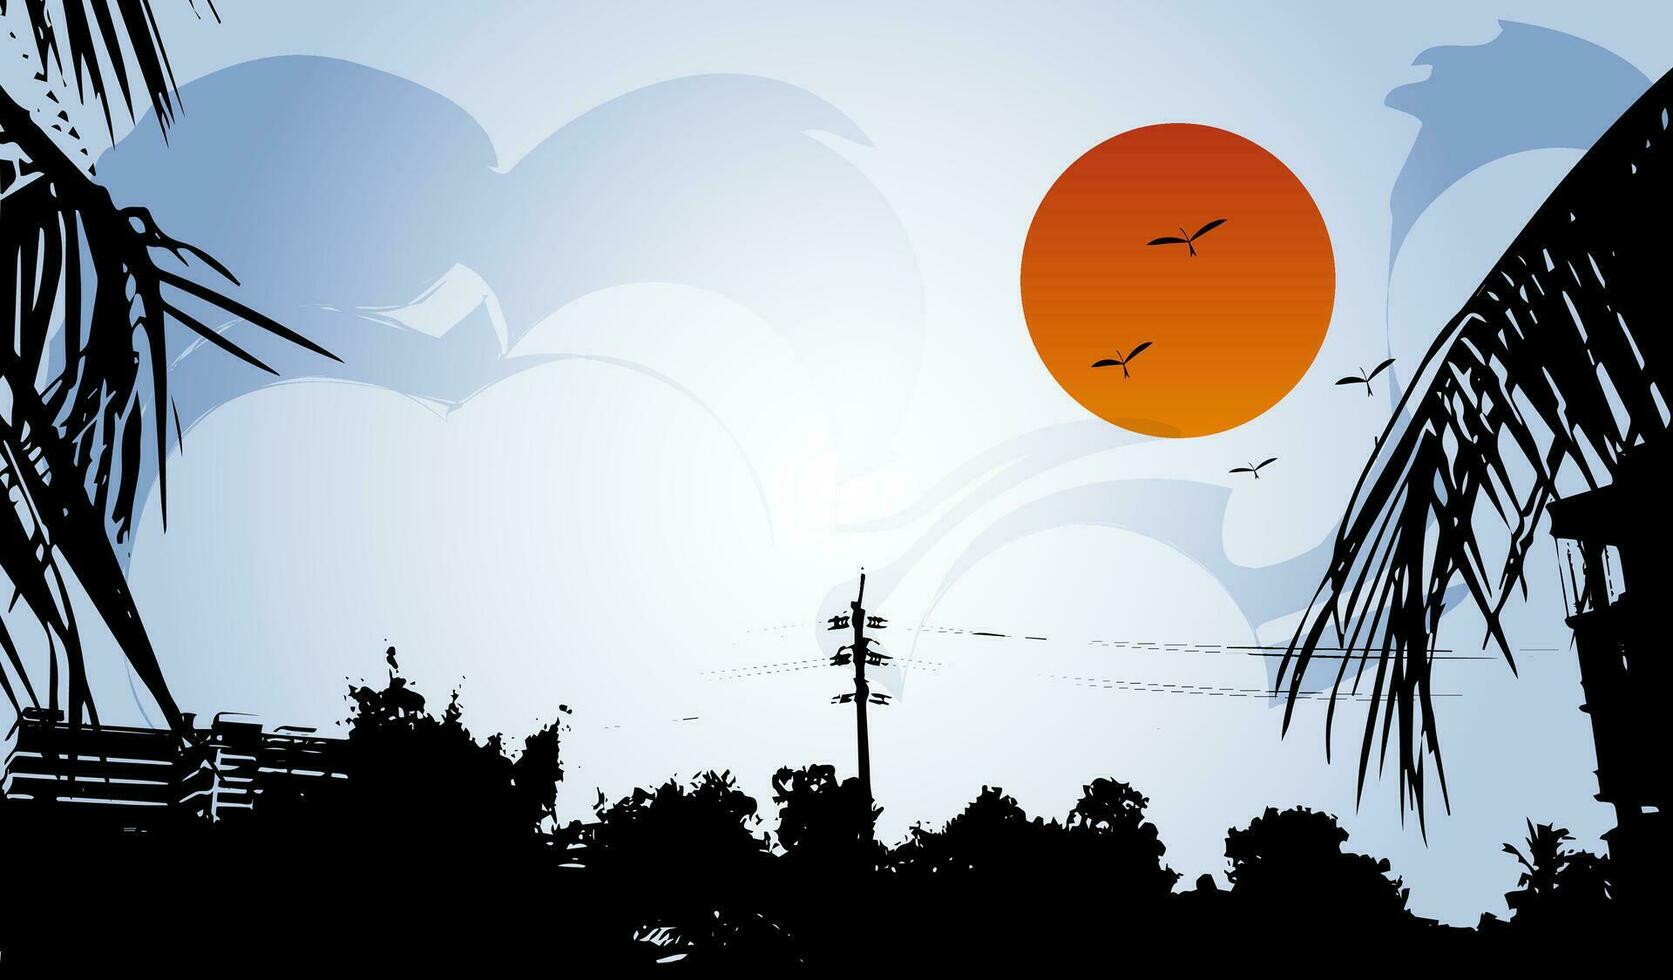 a sunset with palm trees and birds flying over it, branch, sun, sky, nature, tree, sunset, dark, autumn, outdoor, landscape, mountains, yellow, mountain, bat, vector, art, orange, spooky, moon, vector